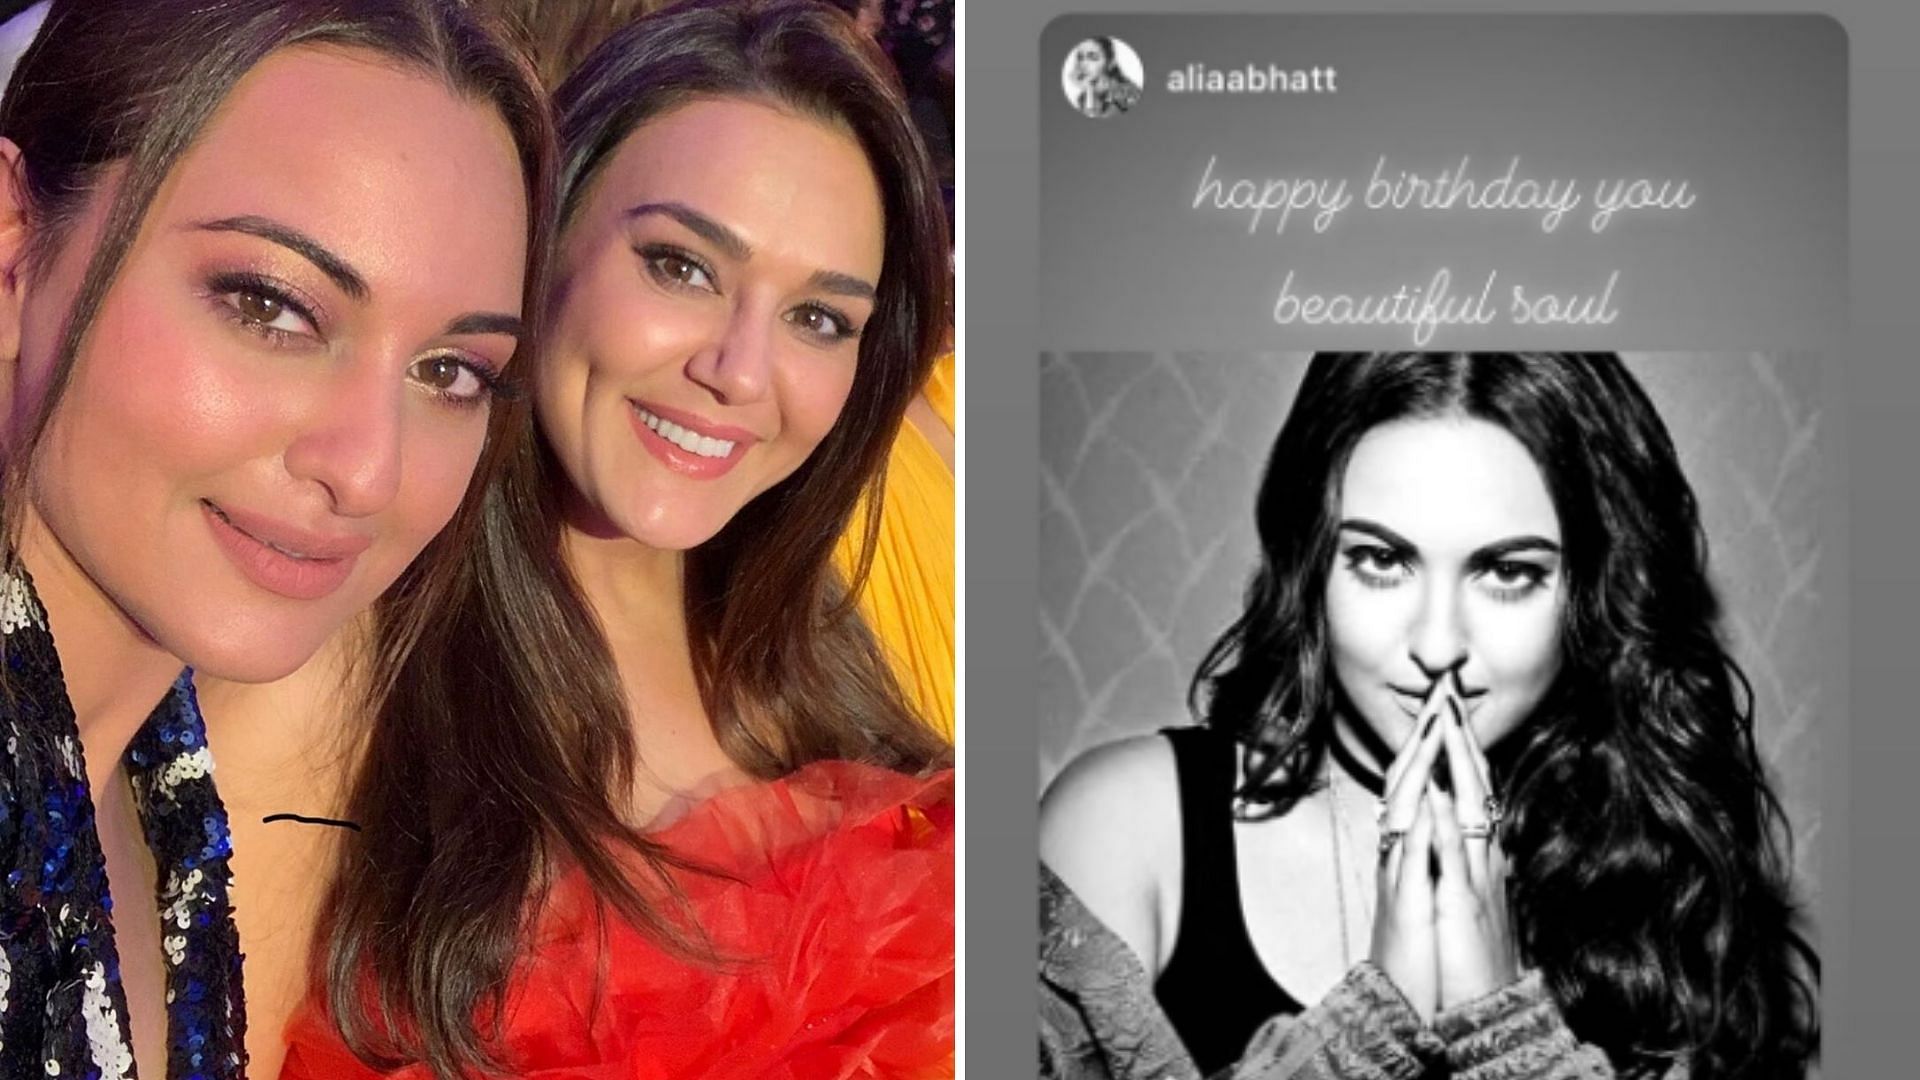 Birthday wishes poured in for Sonakshi Sinha.